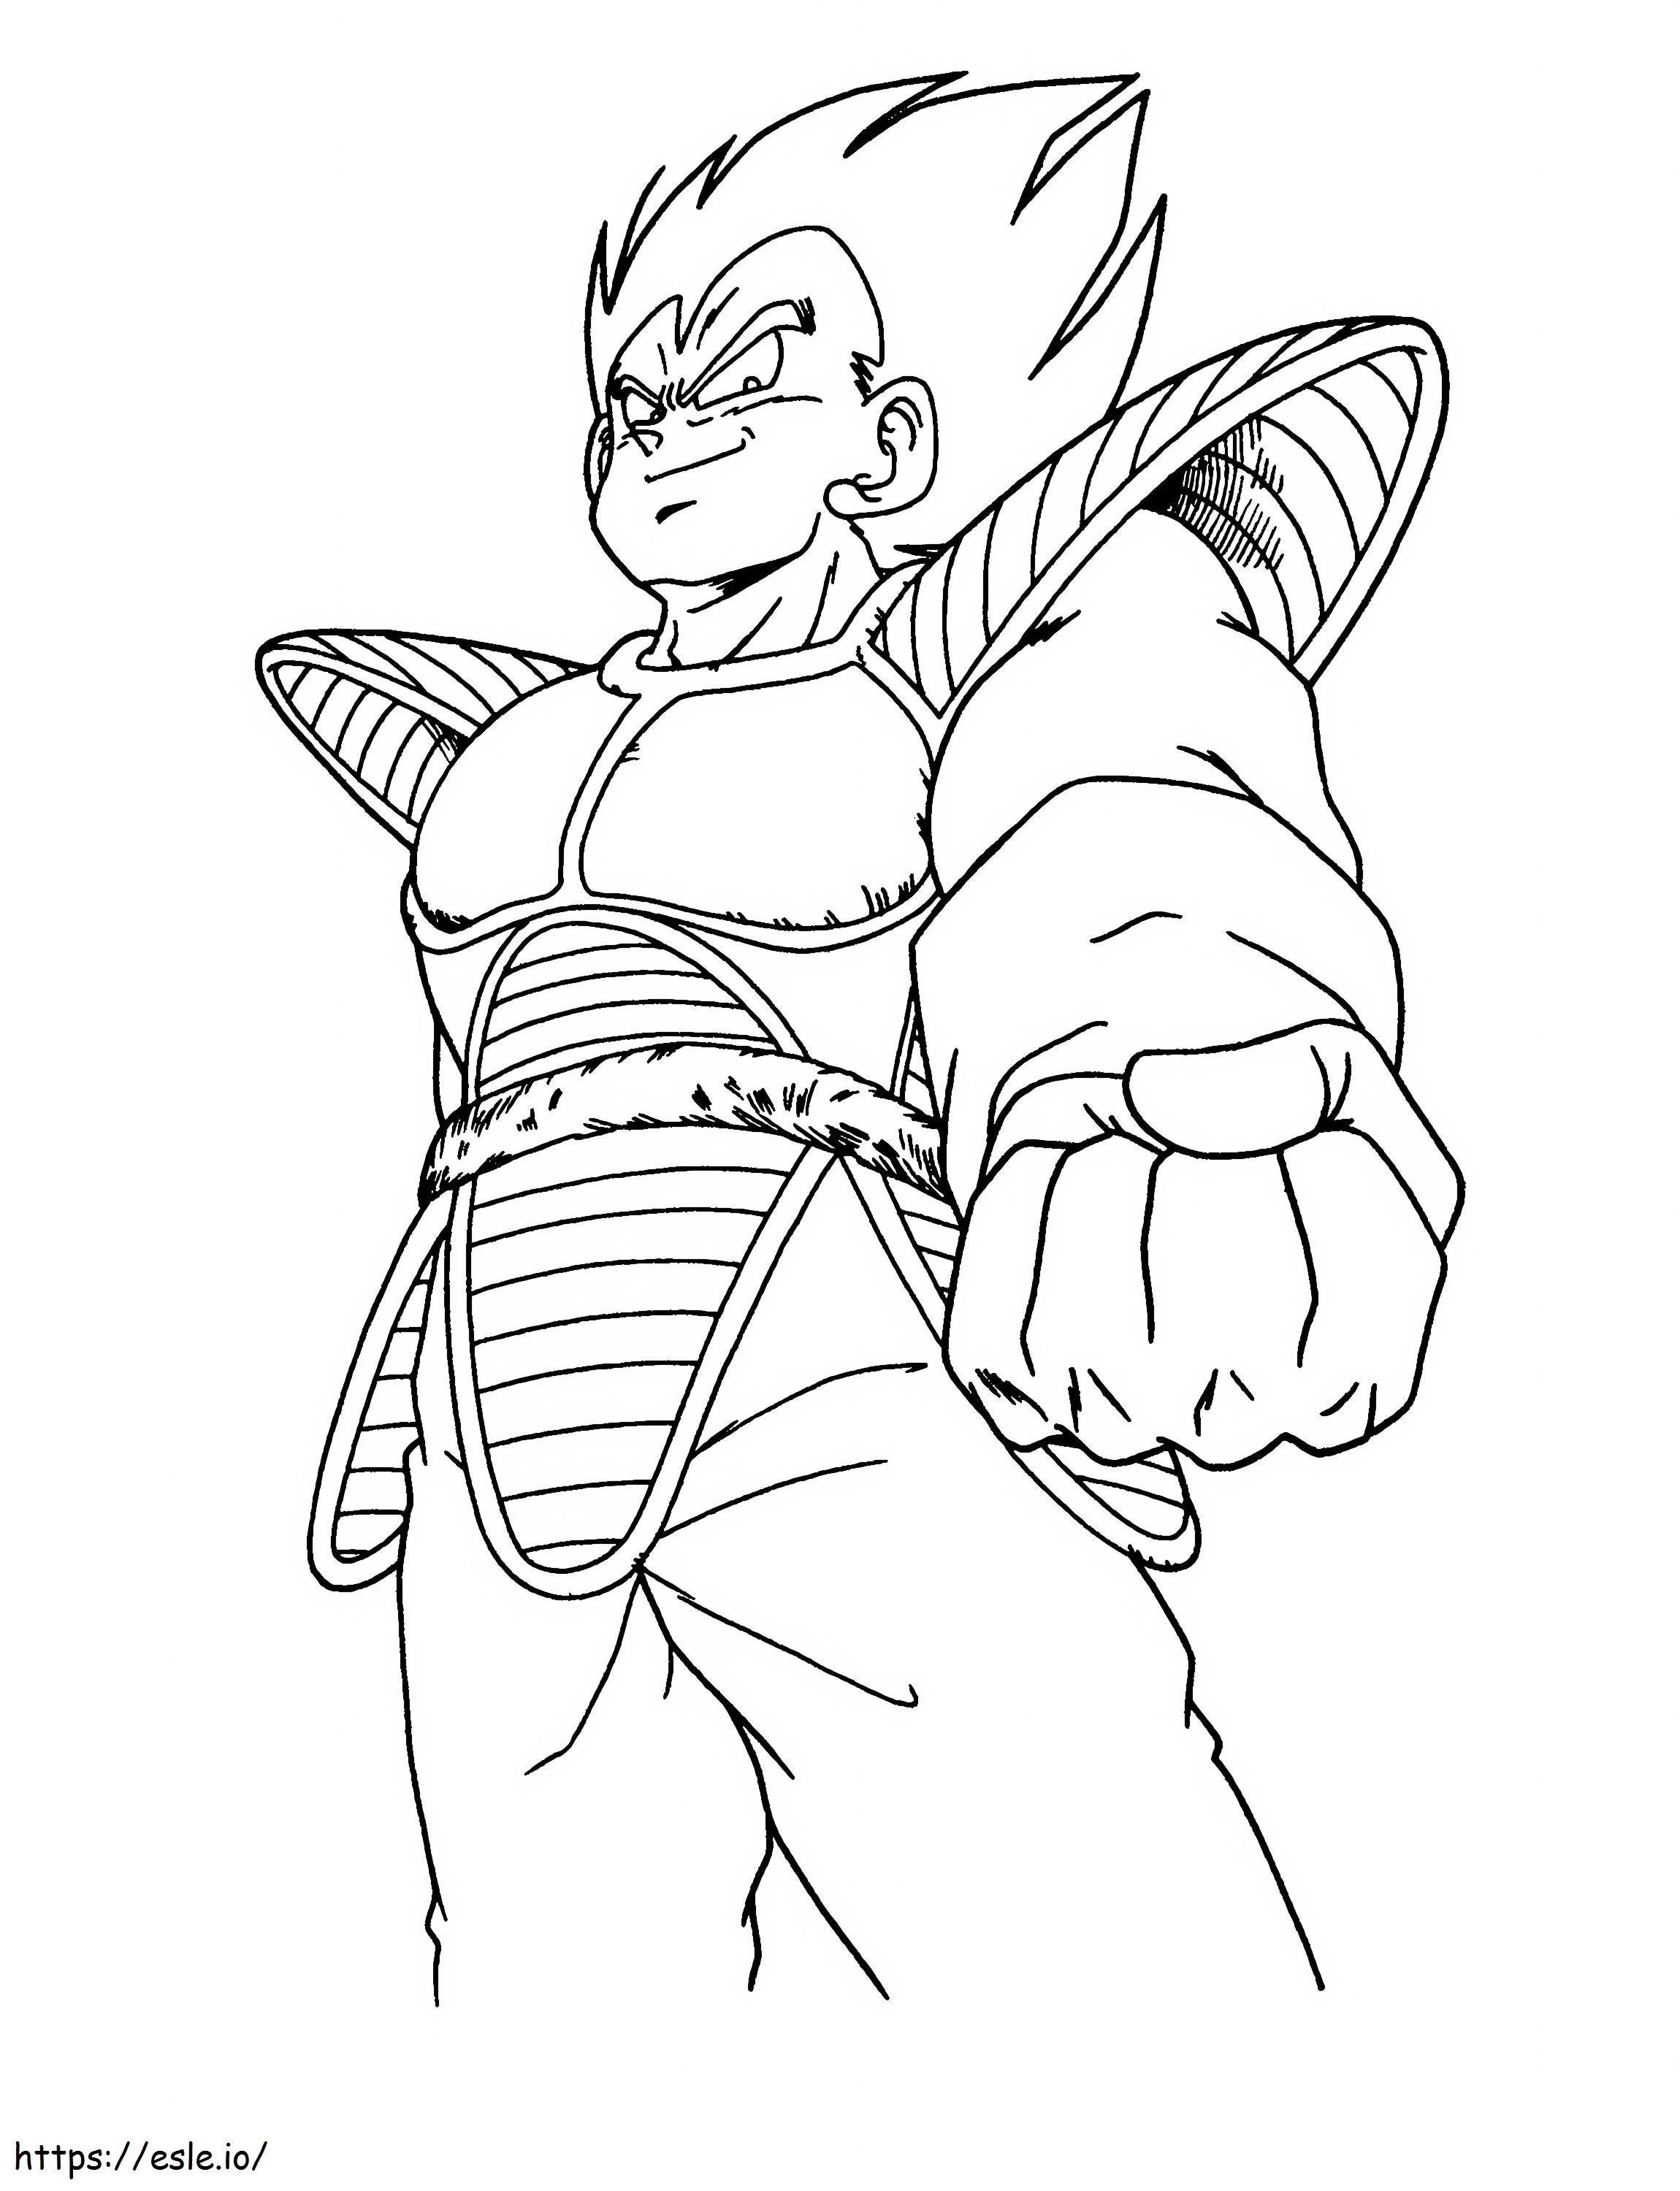 Strong Vegeta Scaled coloring page